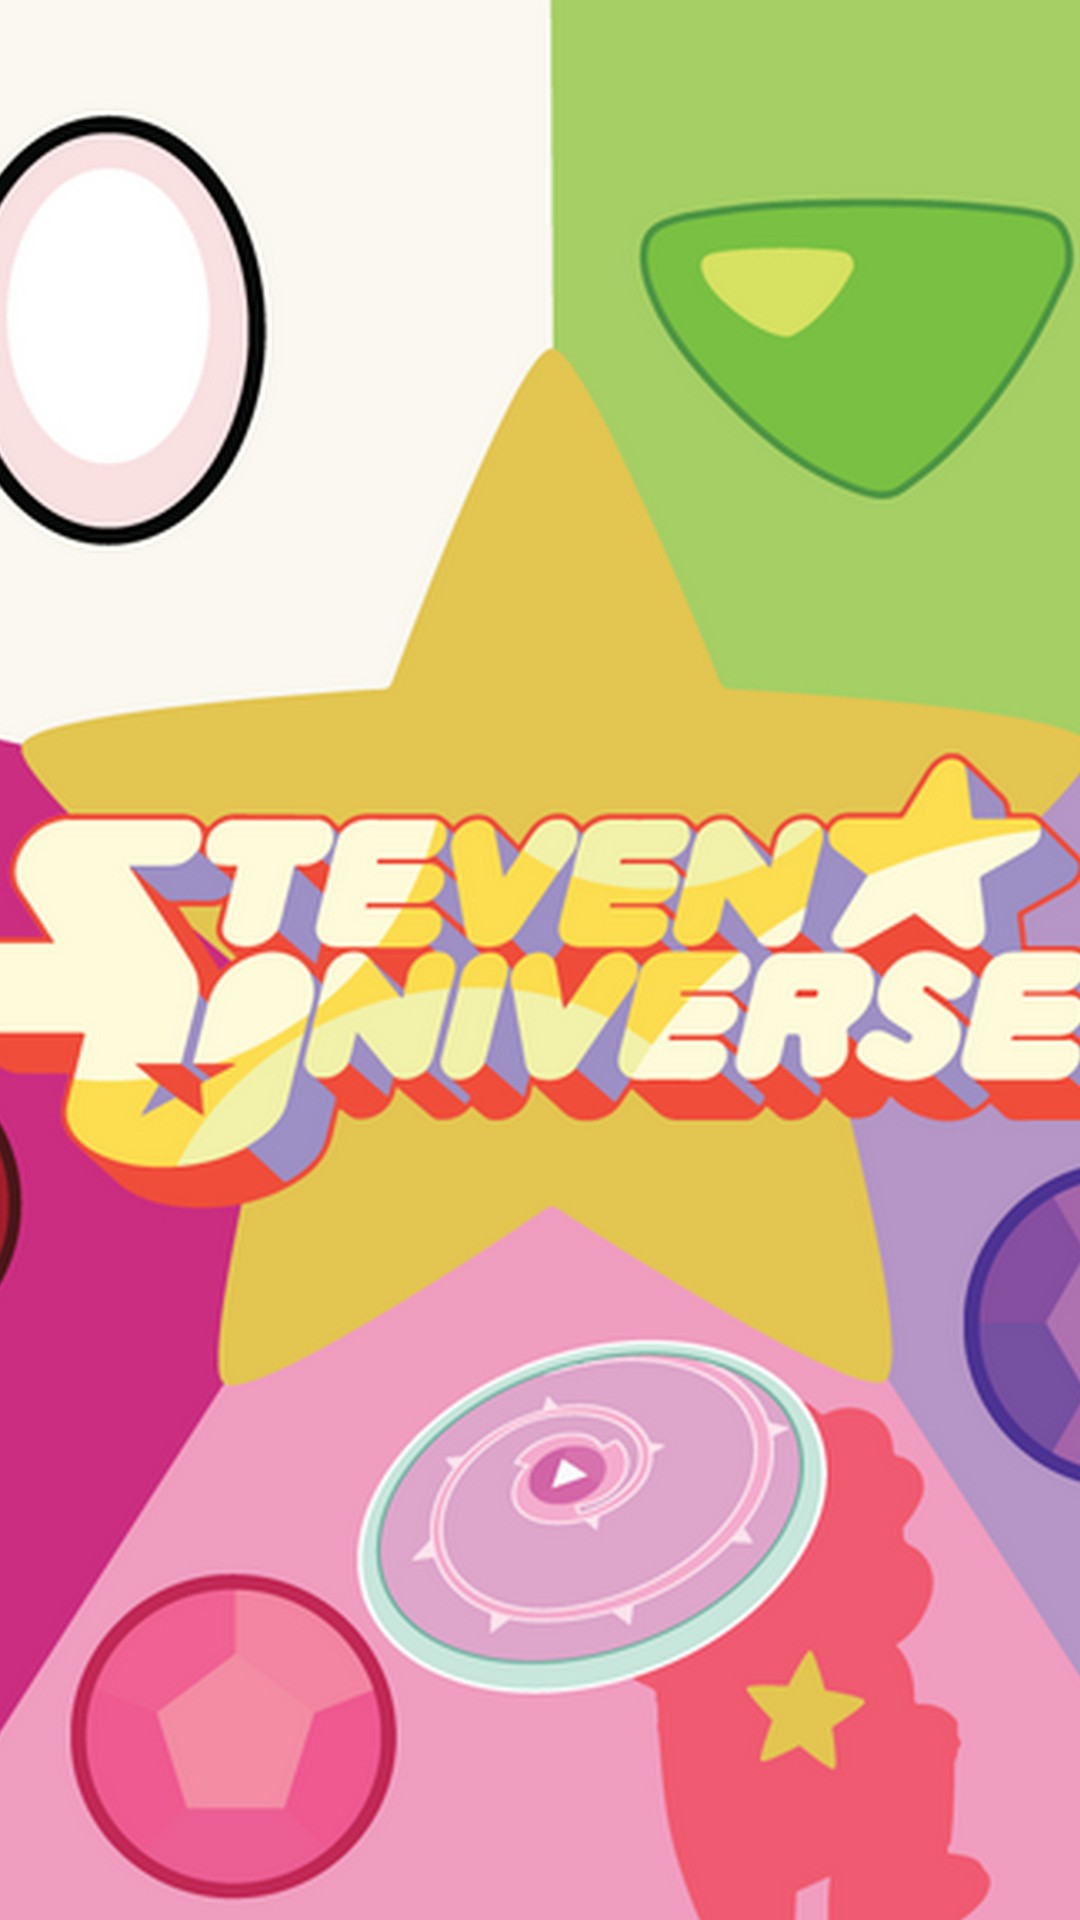 Steven Universe iPhone Wallpaper in HD With high-resolution 1080X1920 pixel. You can set as wallpaper for Apple iPhone X, XS Max, XR, 8, 7, 6, SE, iPad. Enjoy and share your favorite HD wallpapers and background images